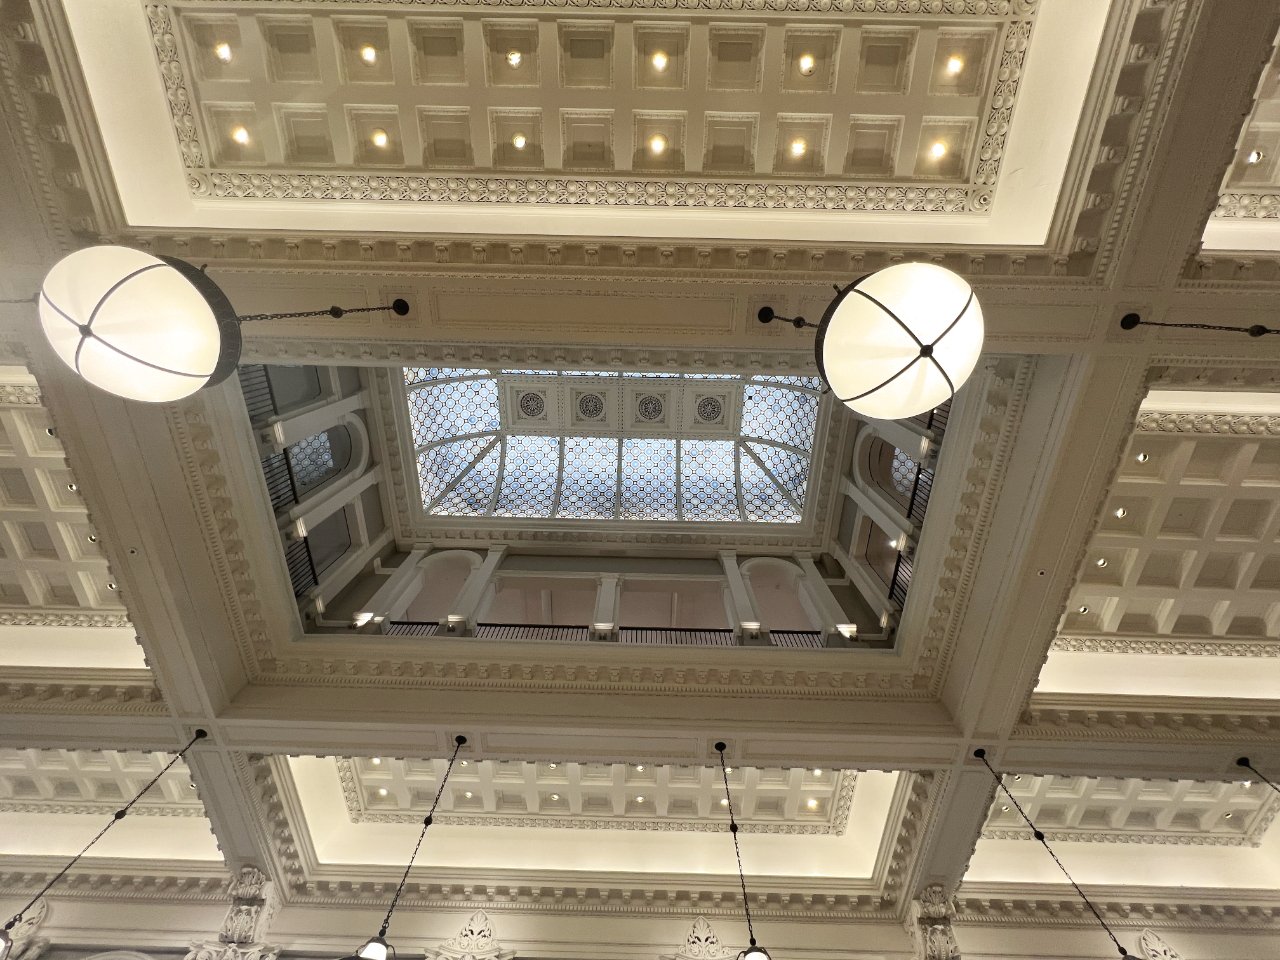 You could see this original skylight when this was a bookshop, but Apple has made it more of a feature